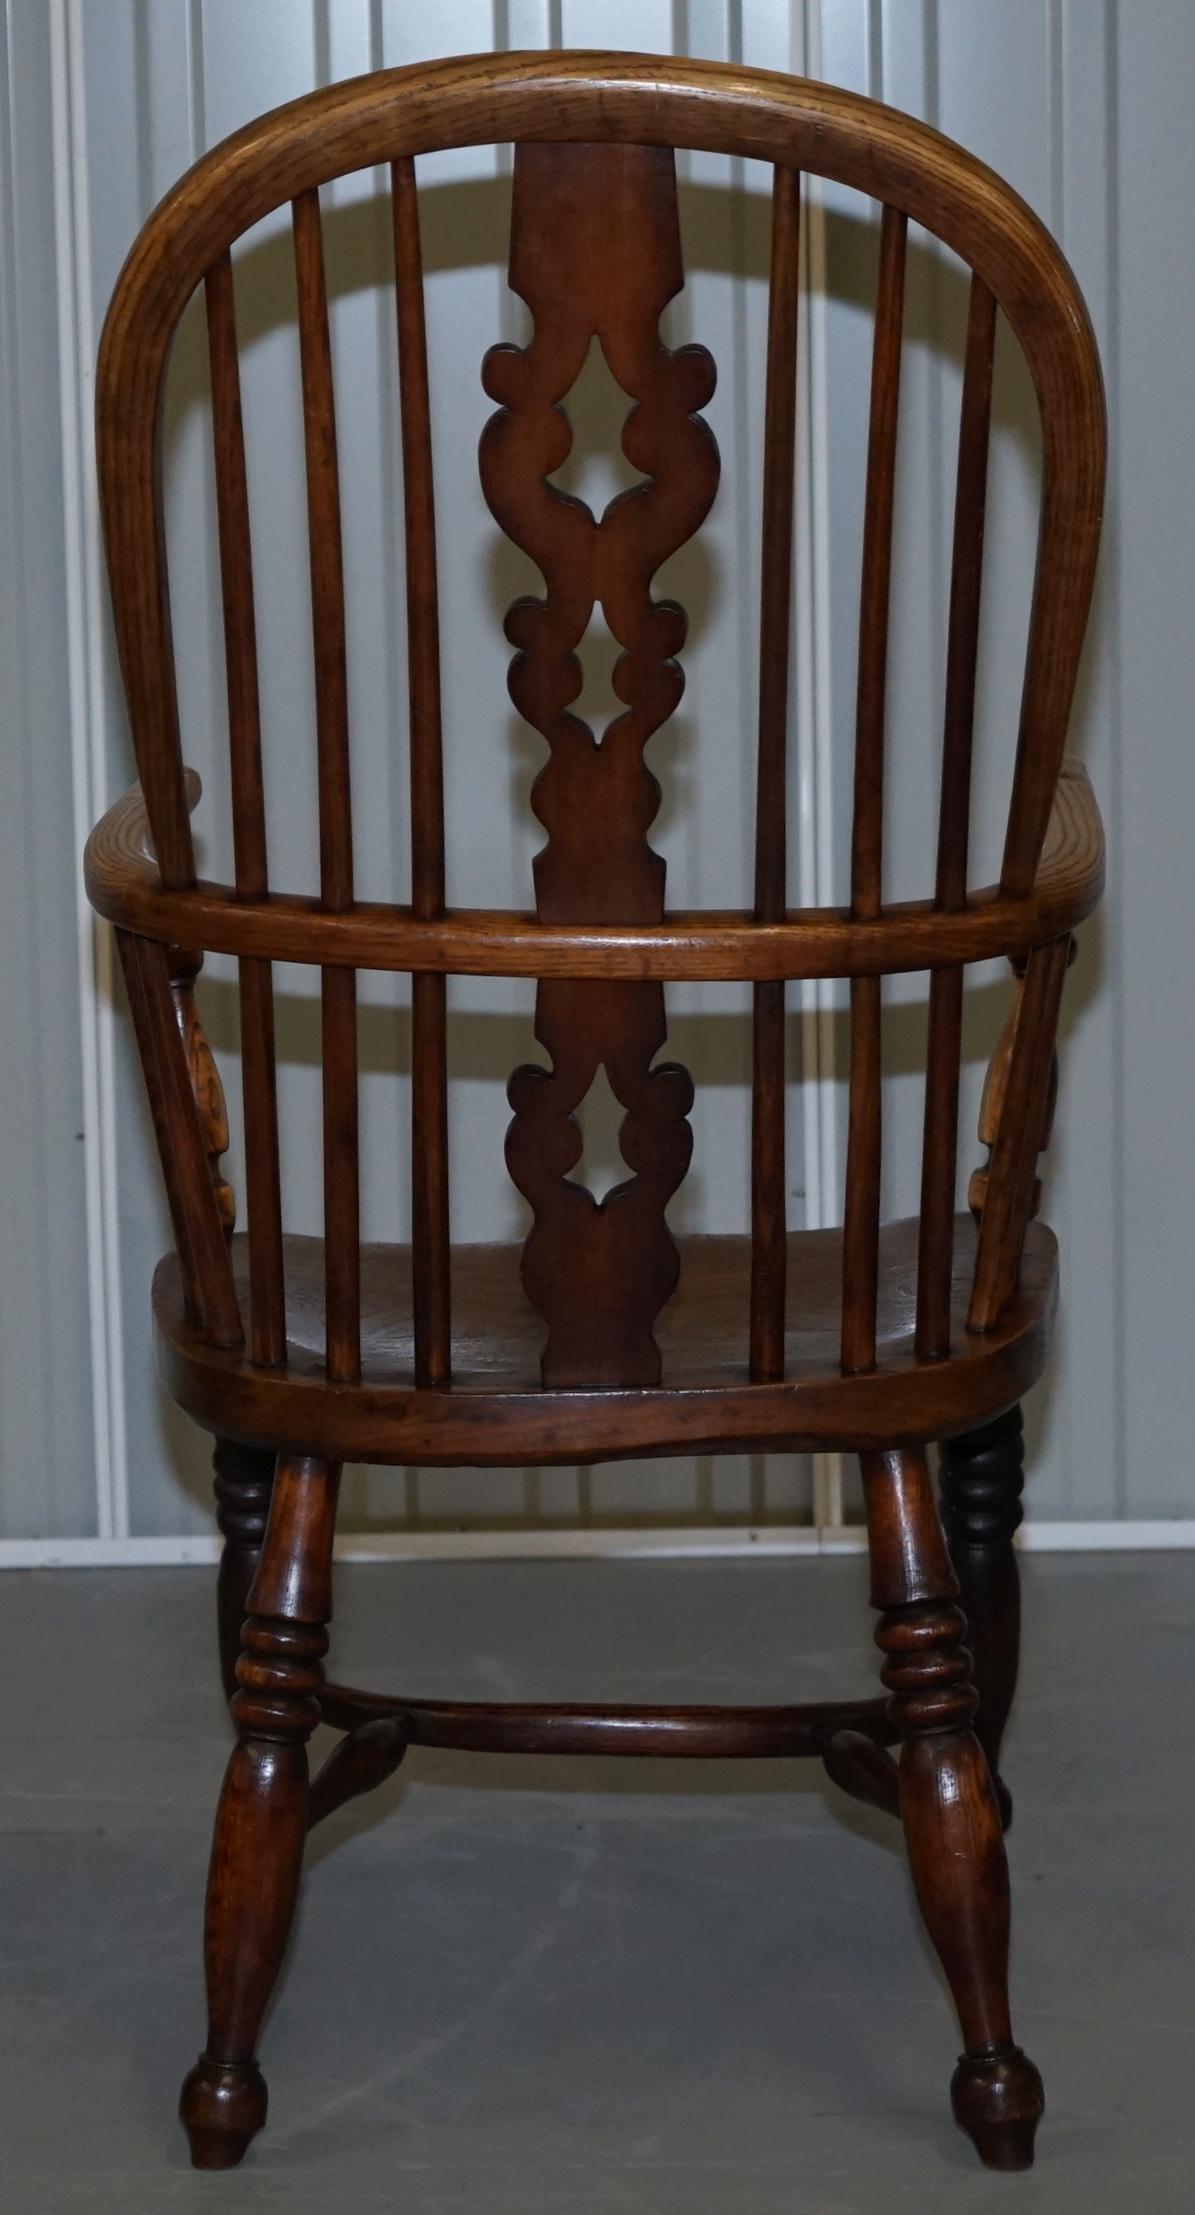 English Classic Antique 19th Century Elm Hoop Back West Country Windsor Armchair For Sale 6